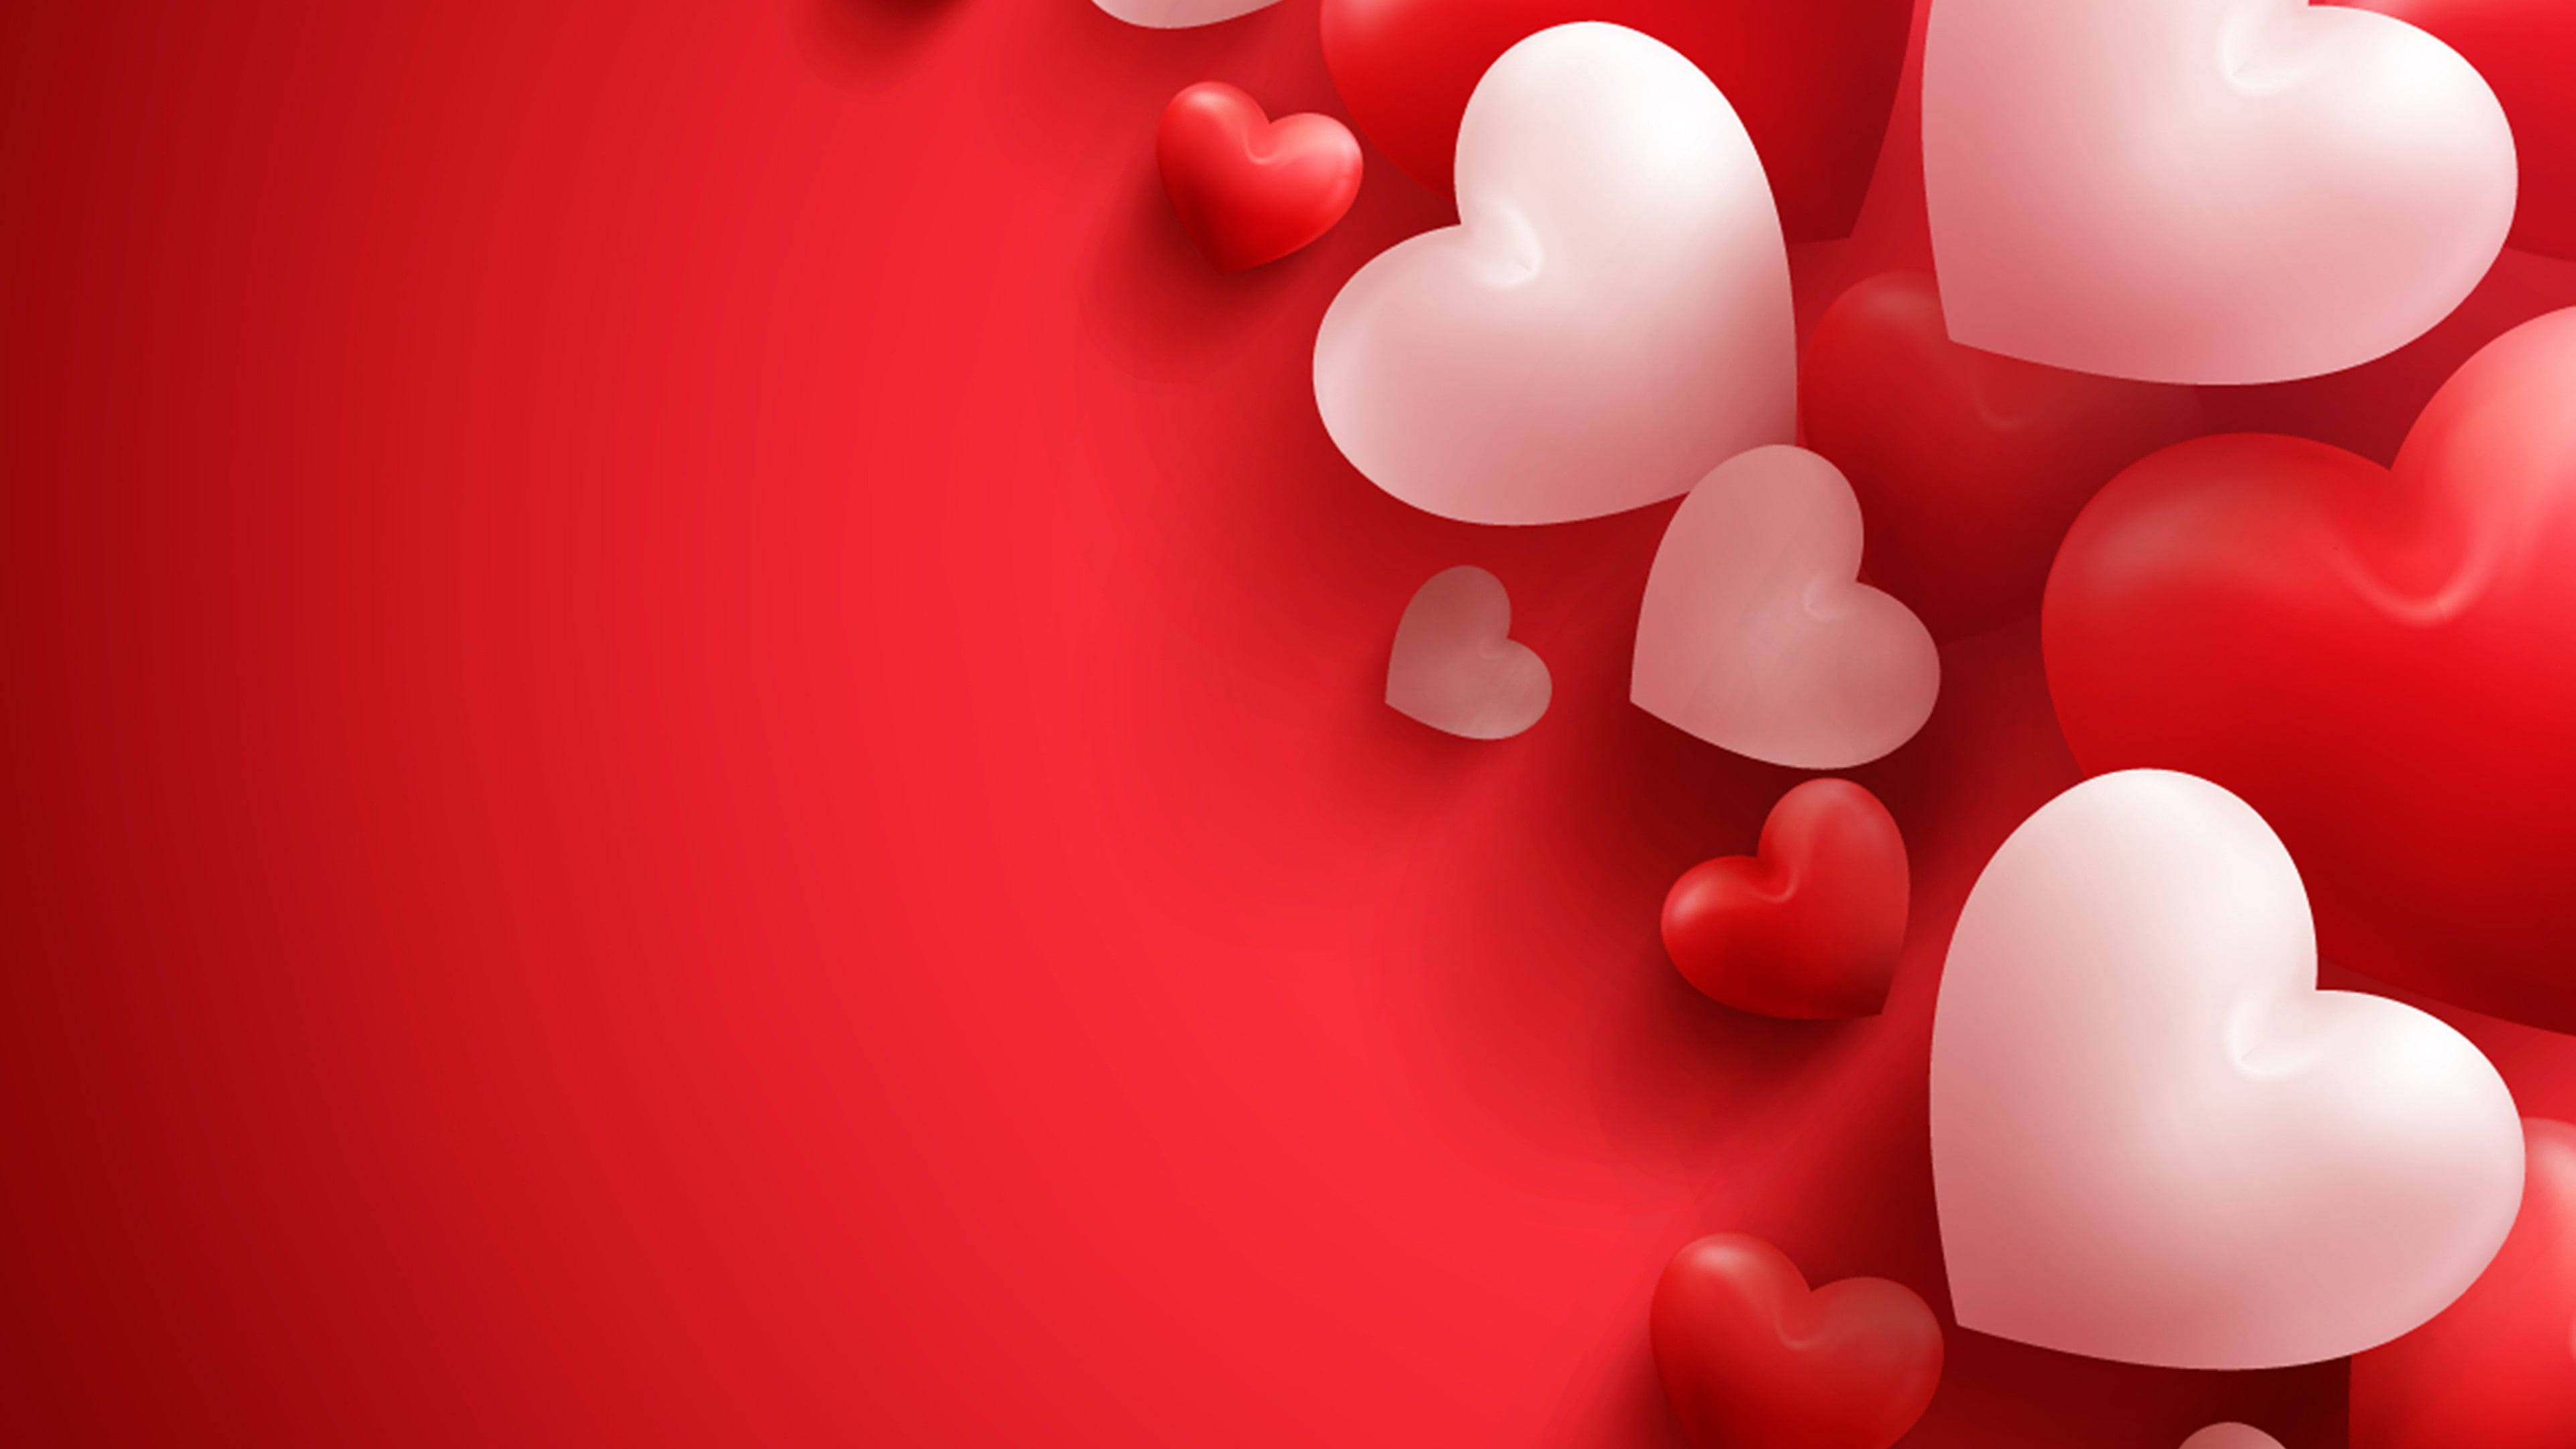 Download Valentine's Awesome Heart Wallpaper